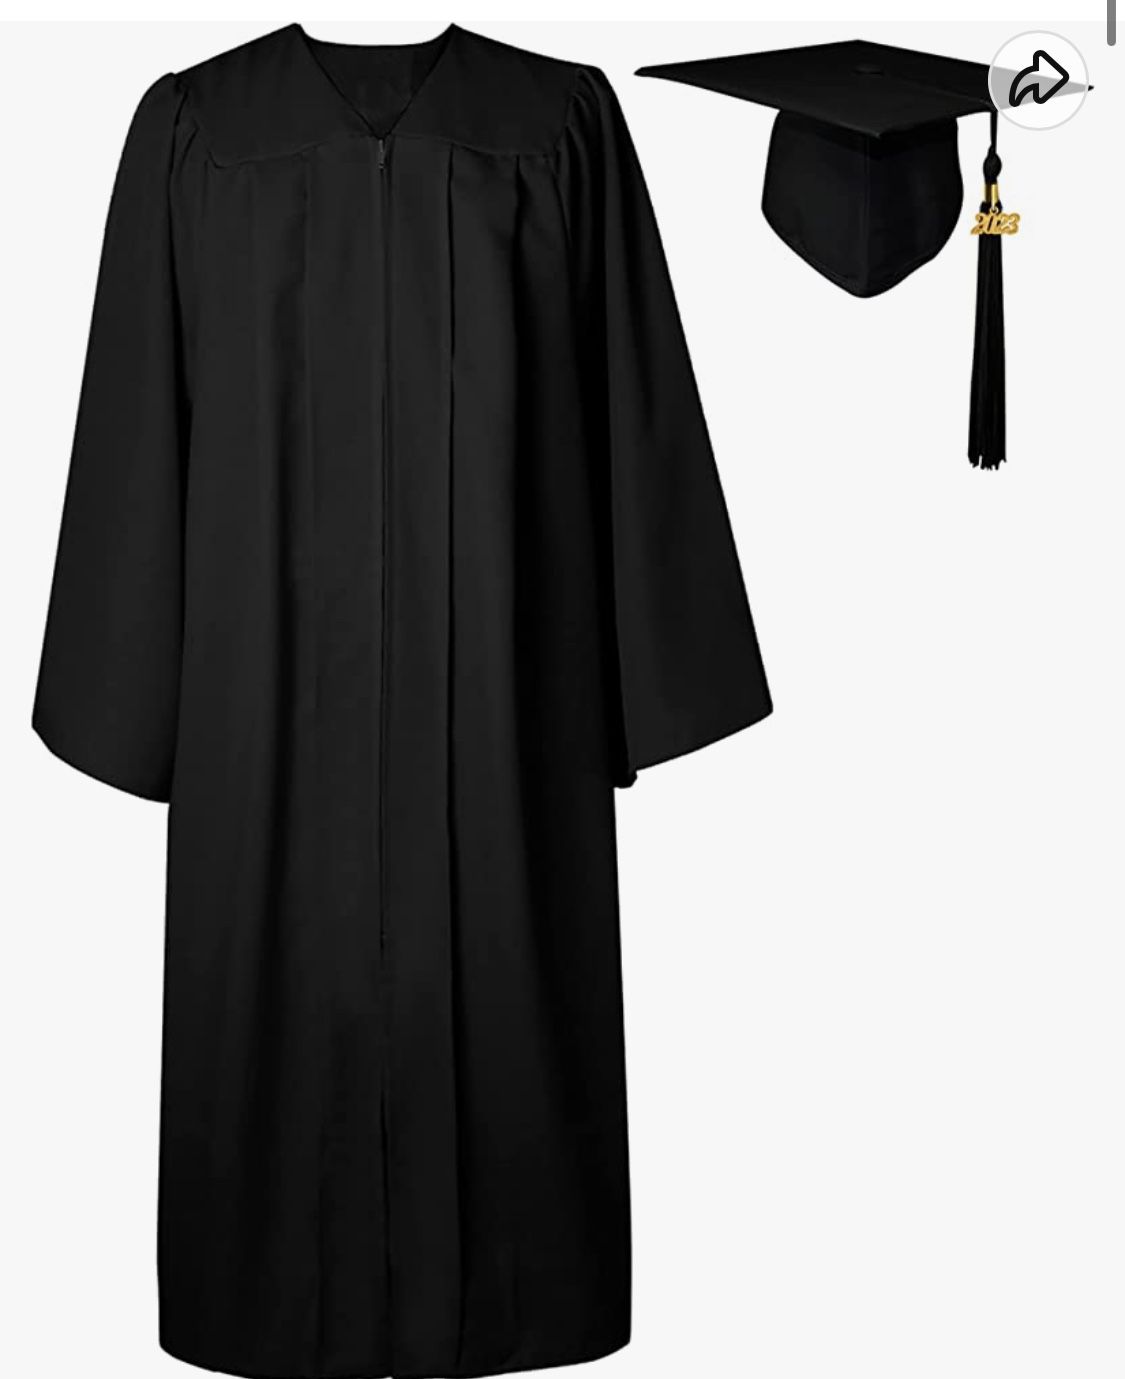 Brand New Graduation Cap And Gown